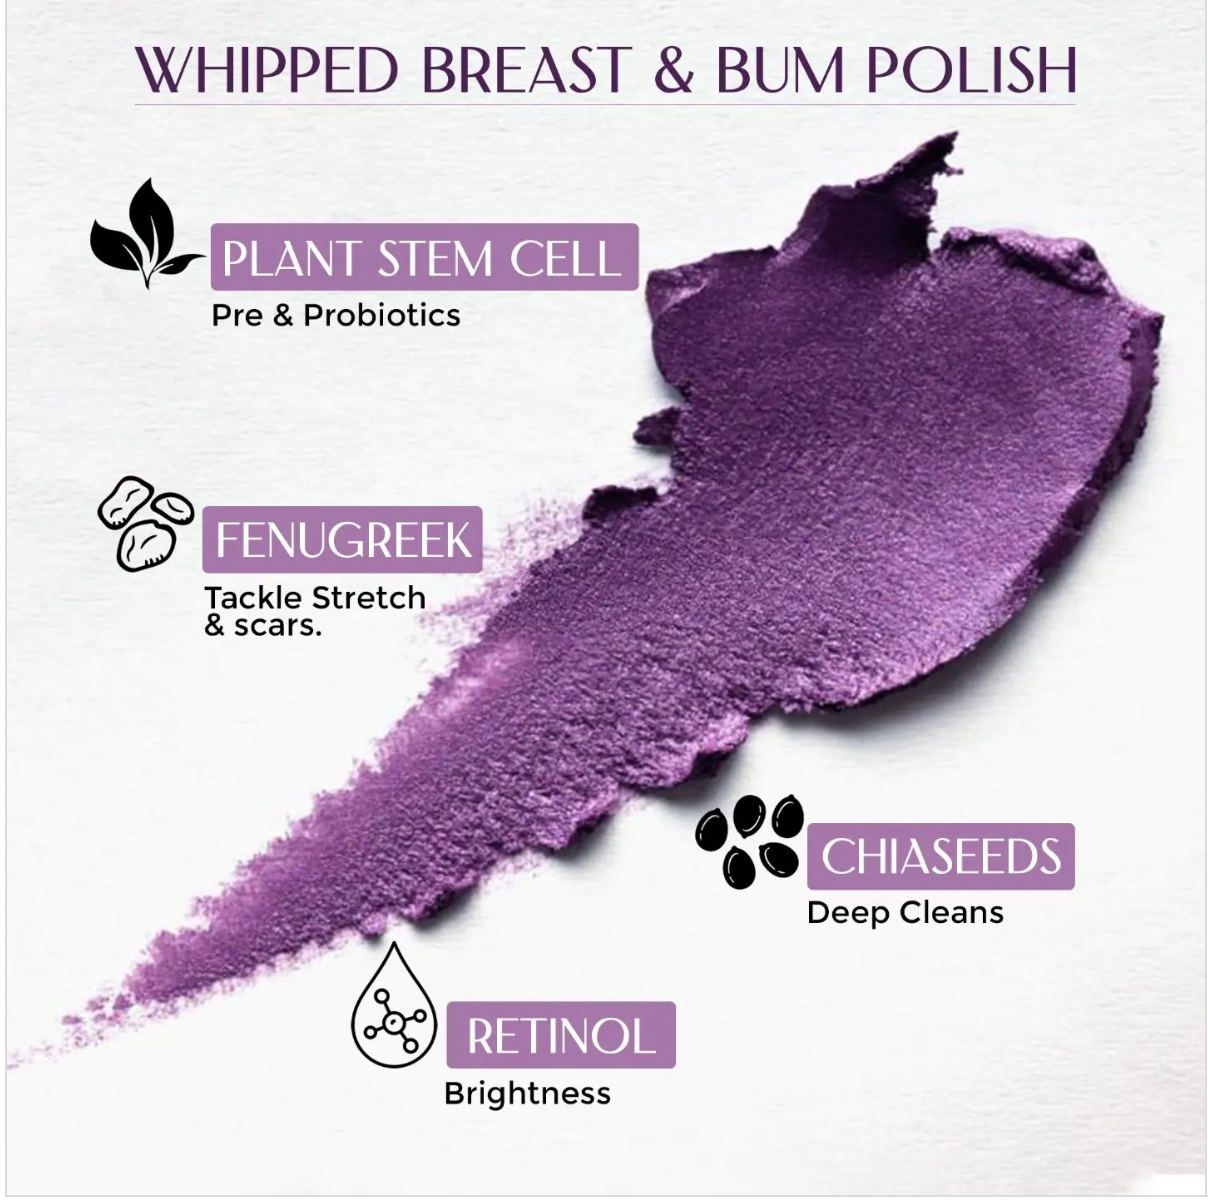 Whipped Breast and Bum Polish